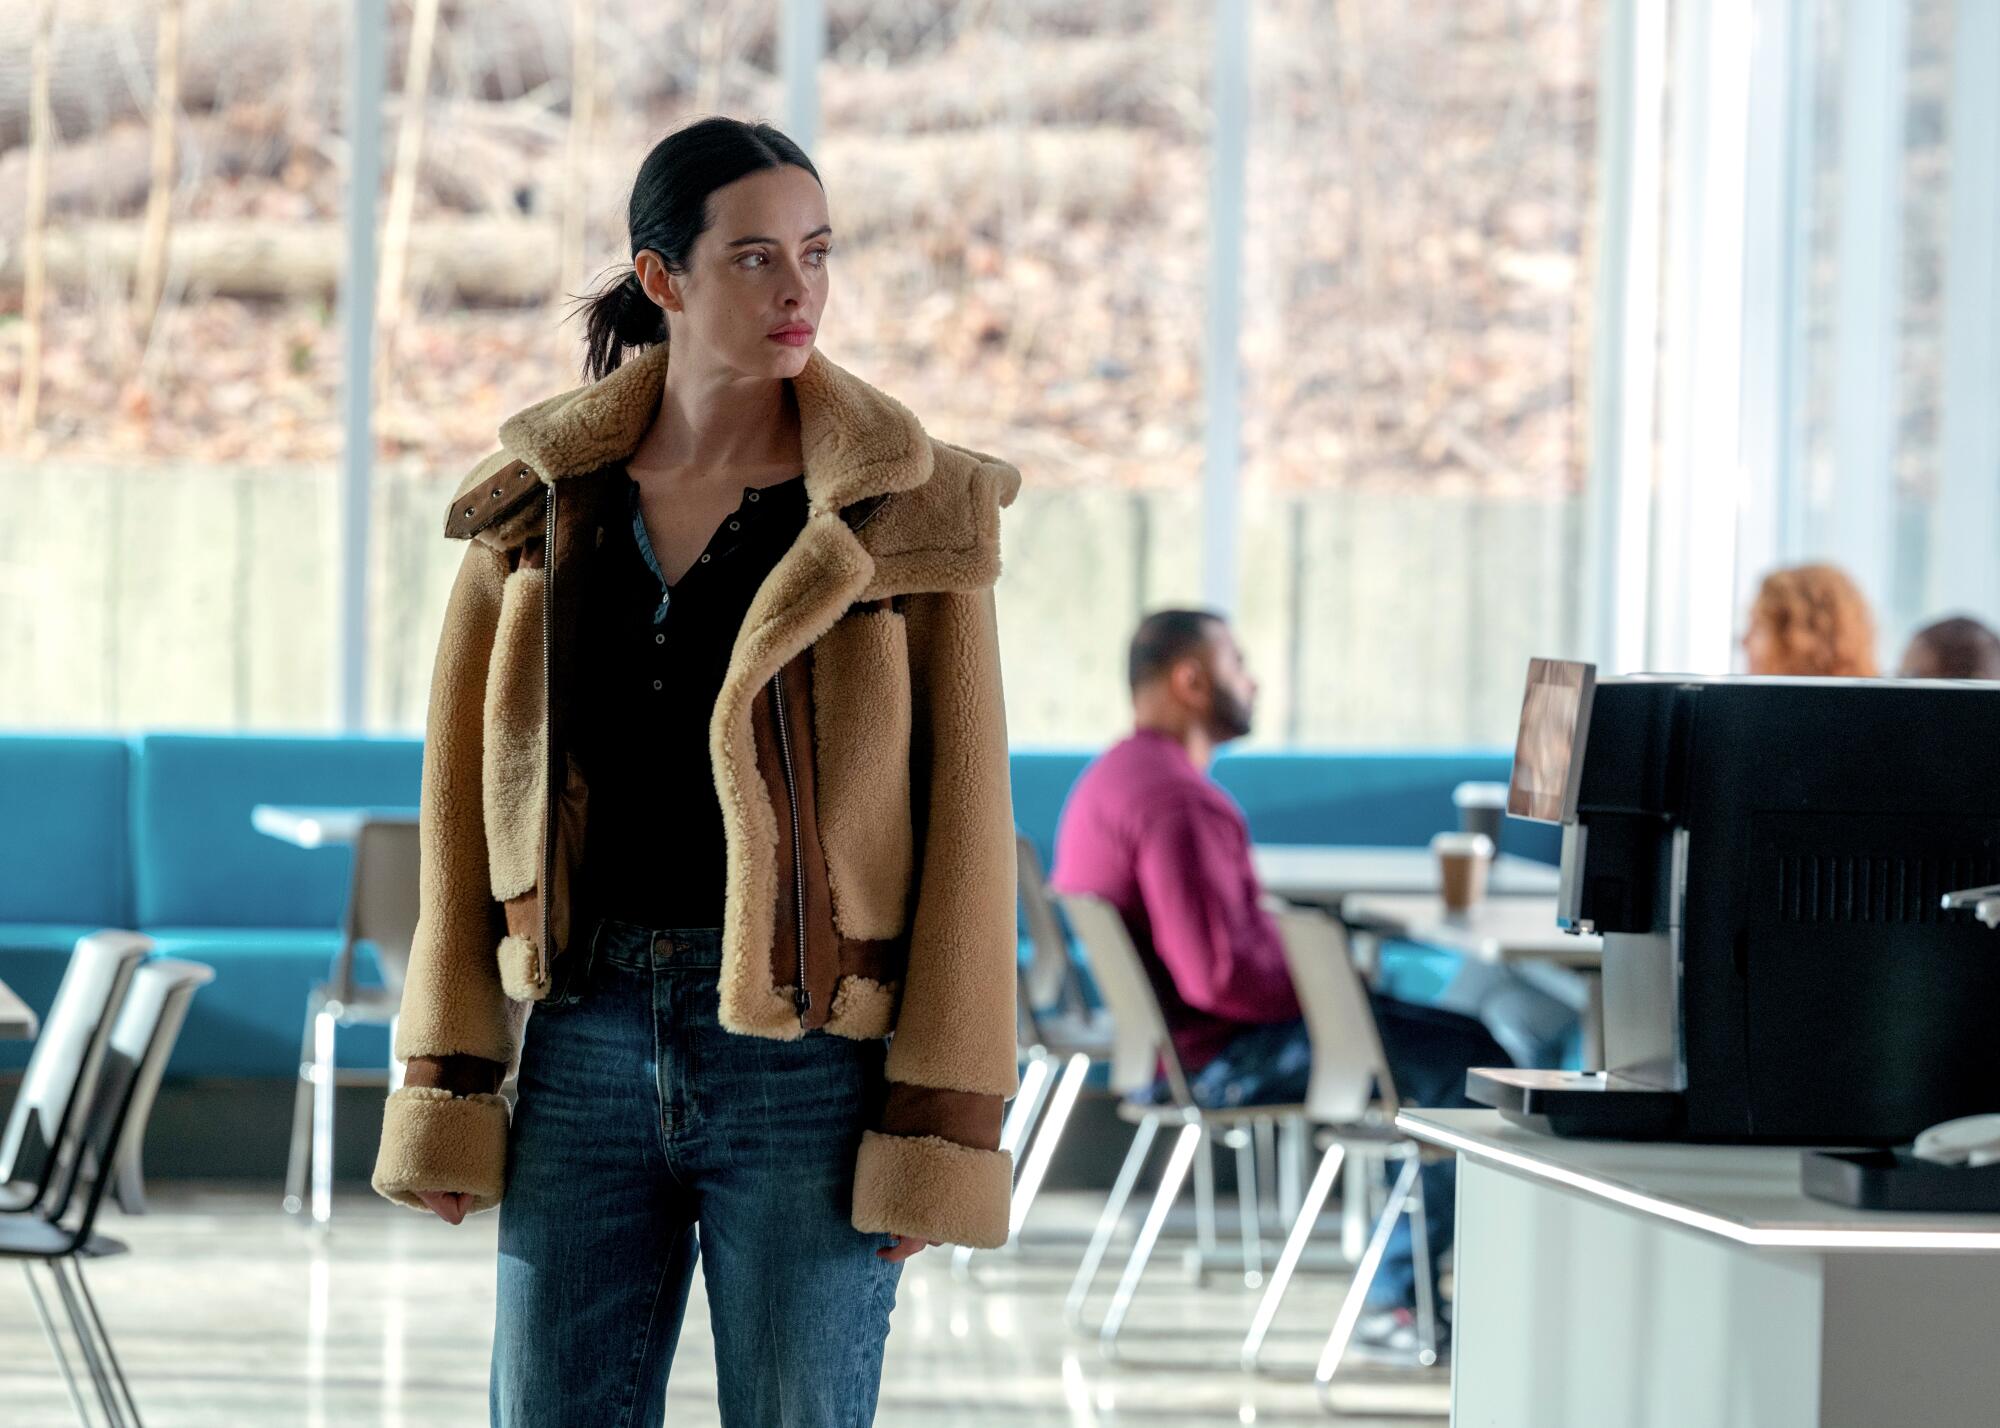 A woman in a brown aviator coat and jeans stands in a cafeteria.